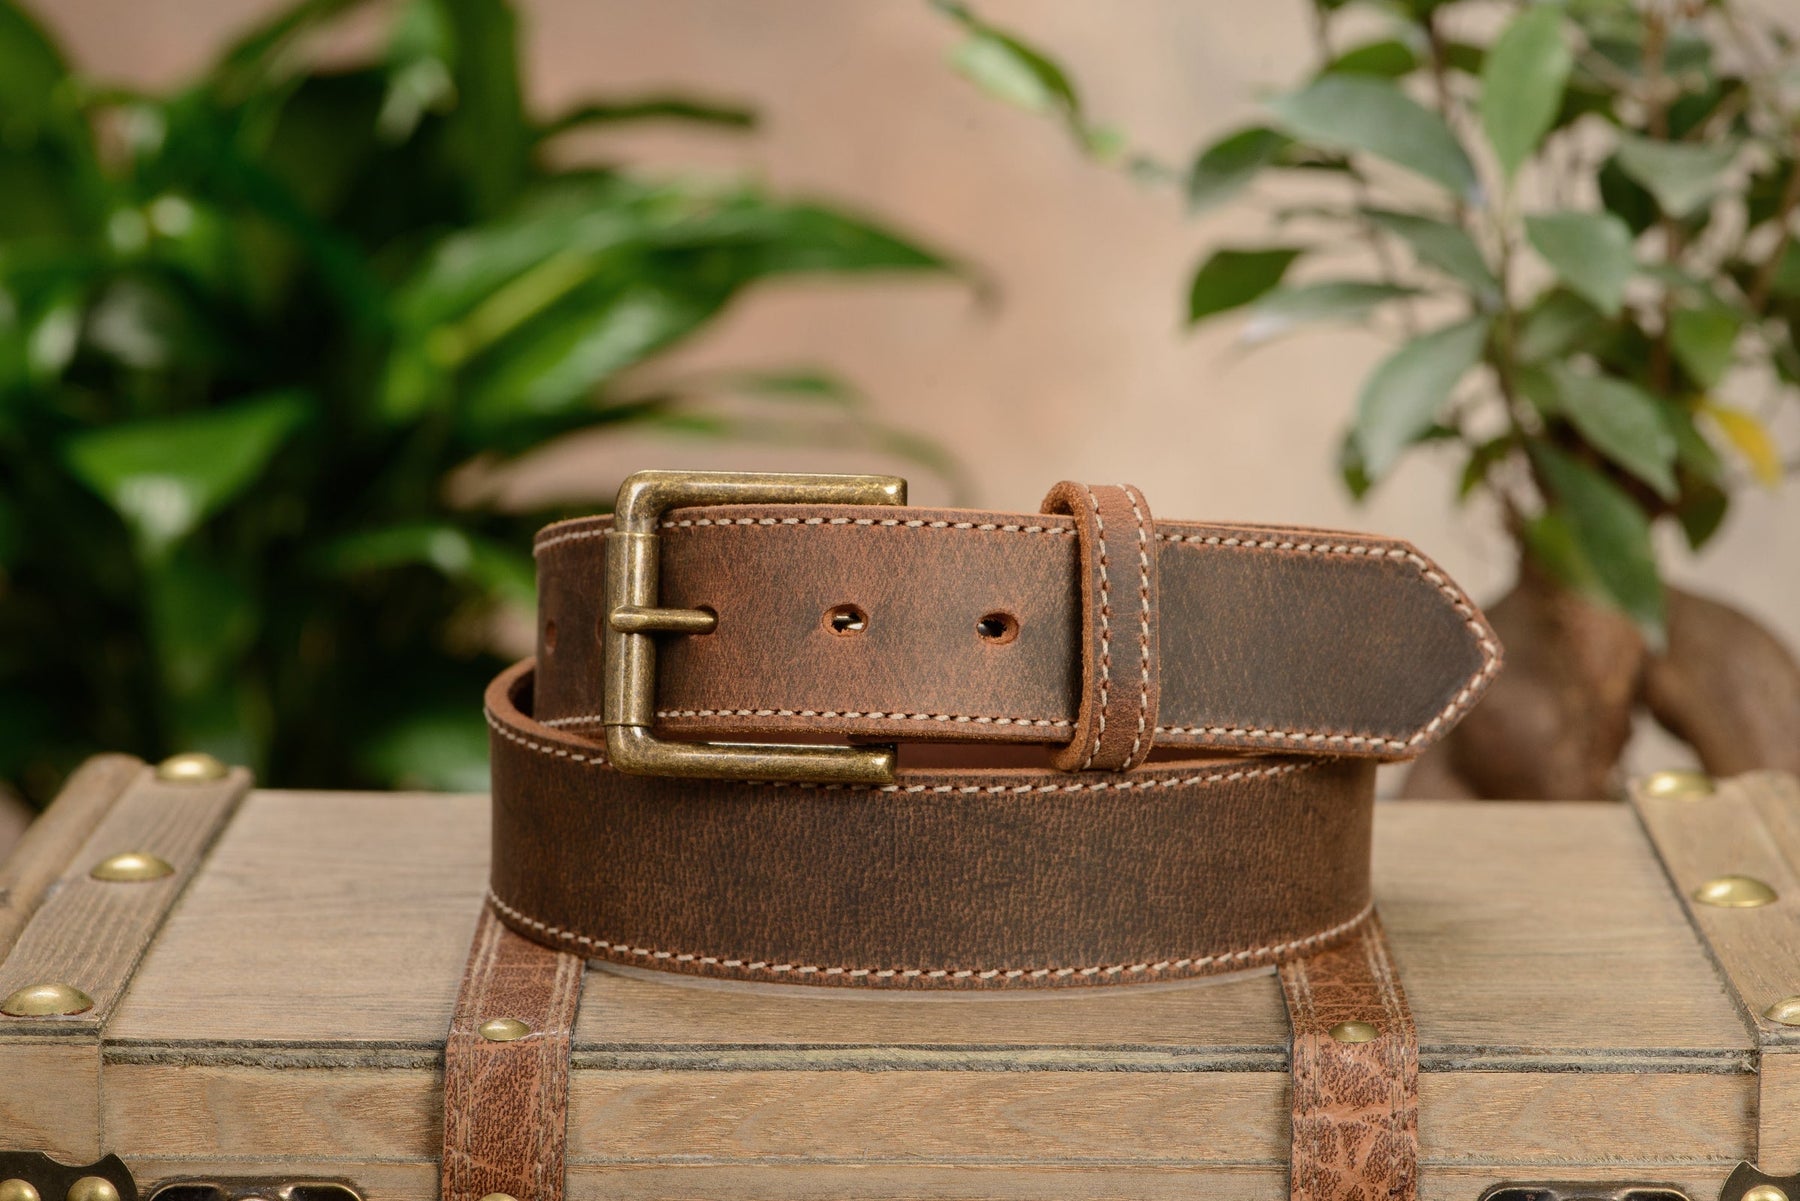 FLASH SALE - The Crazy Horse: Rustic Brown Stitched Leather Belt 1.50 ...